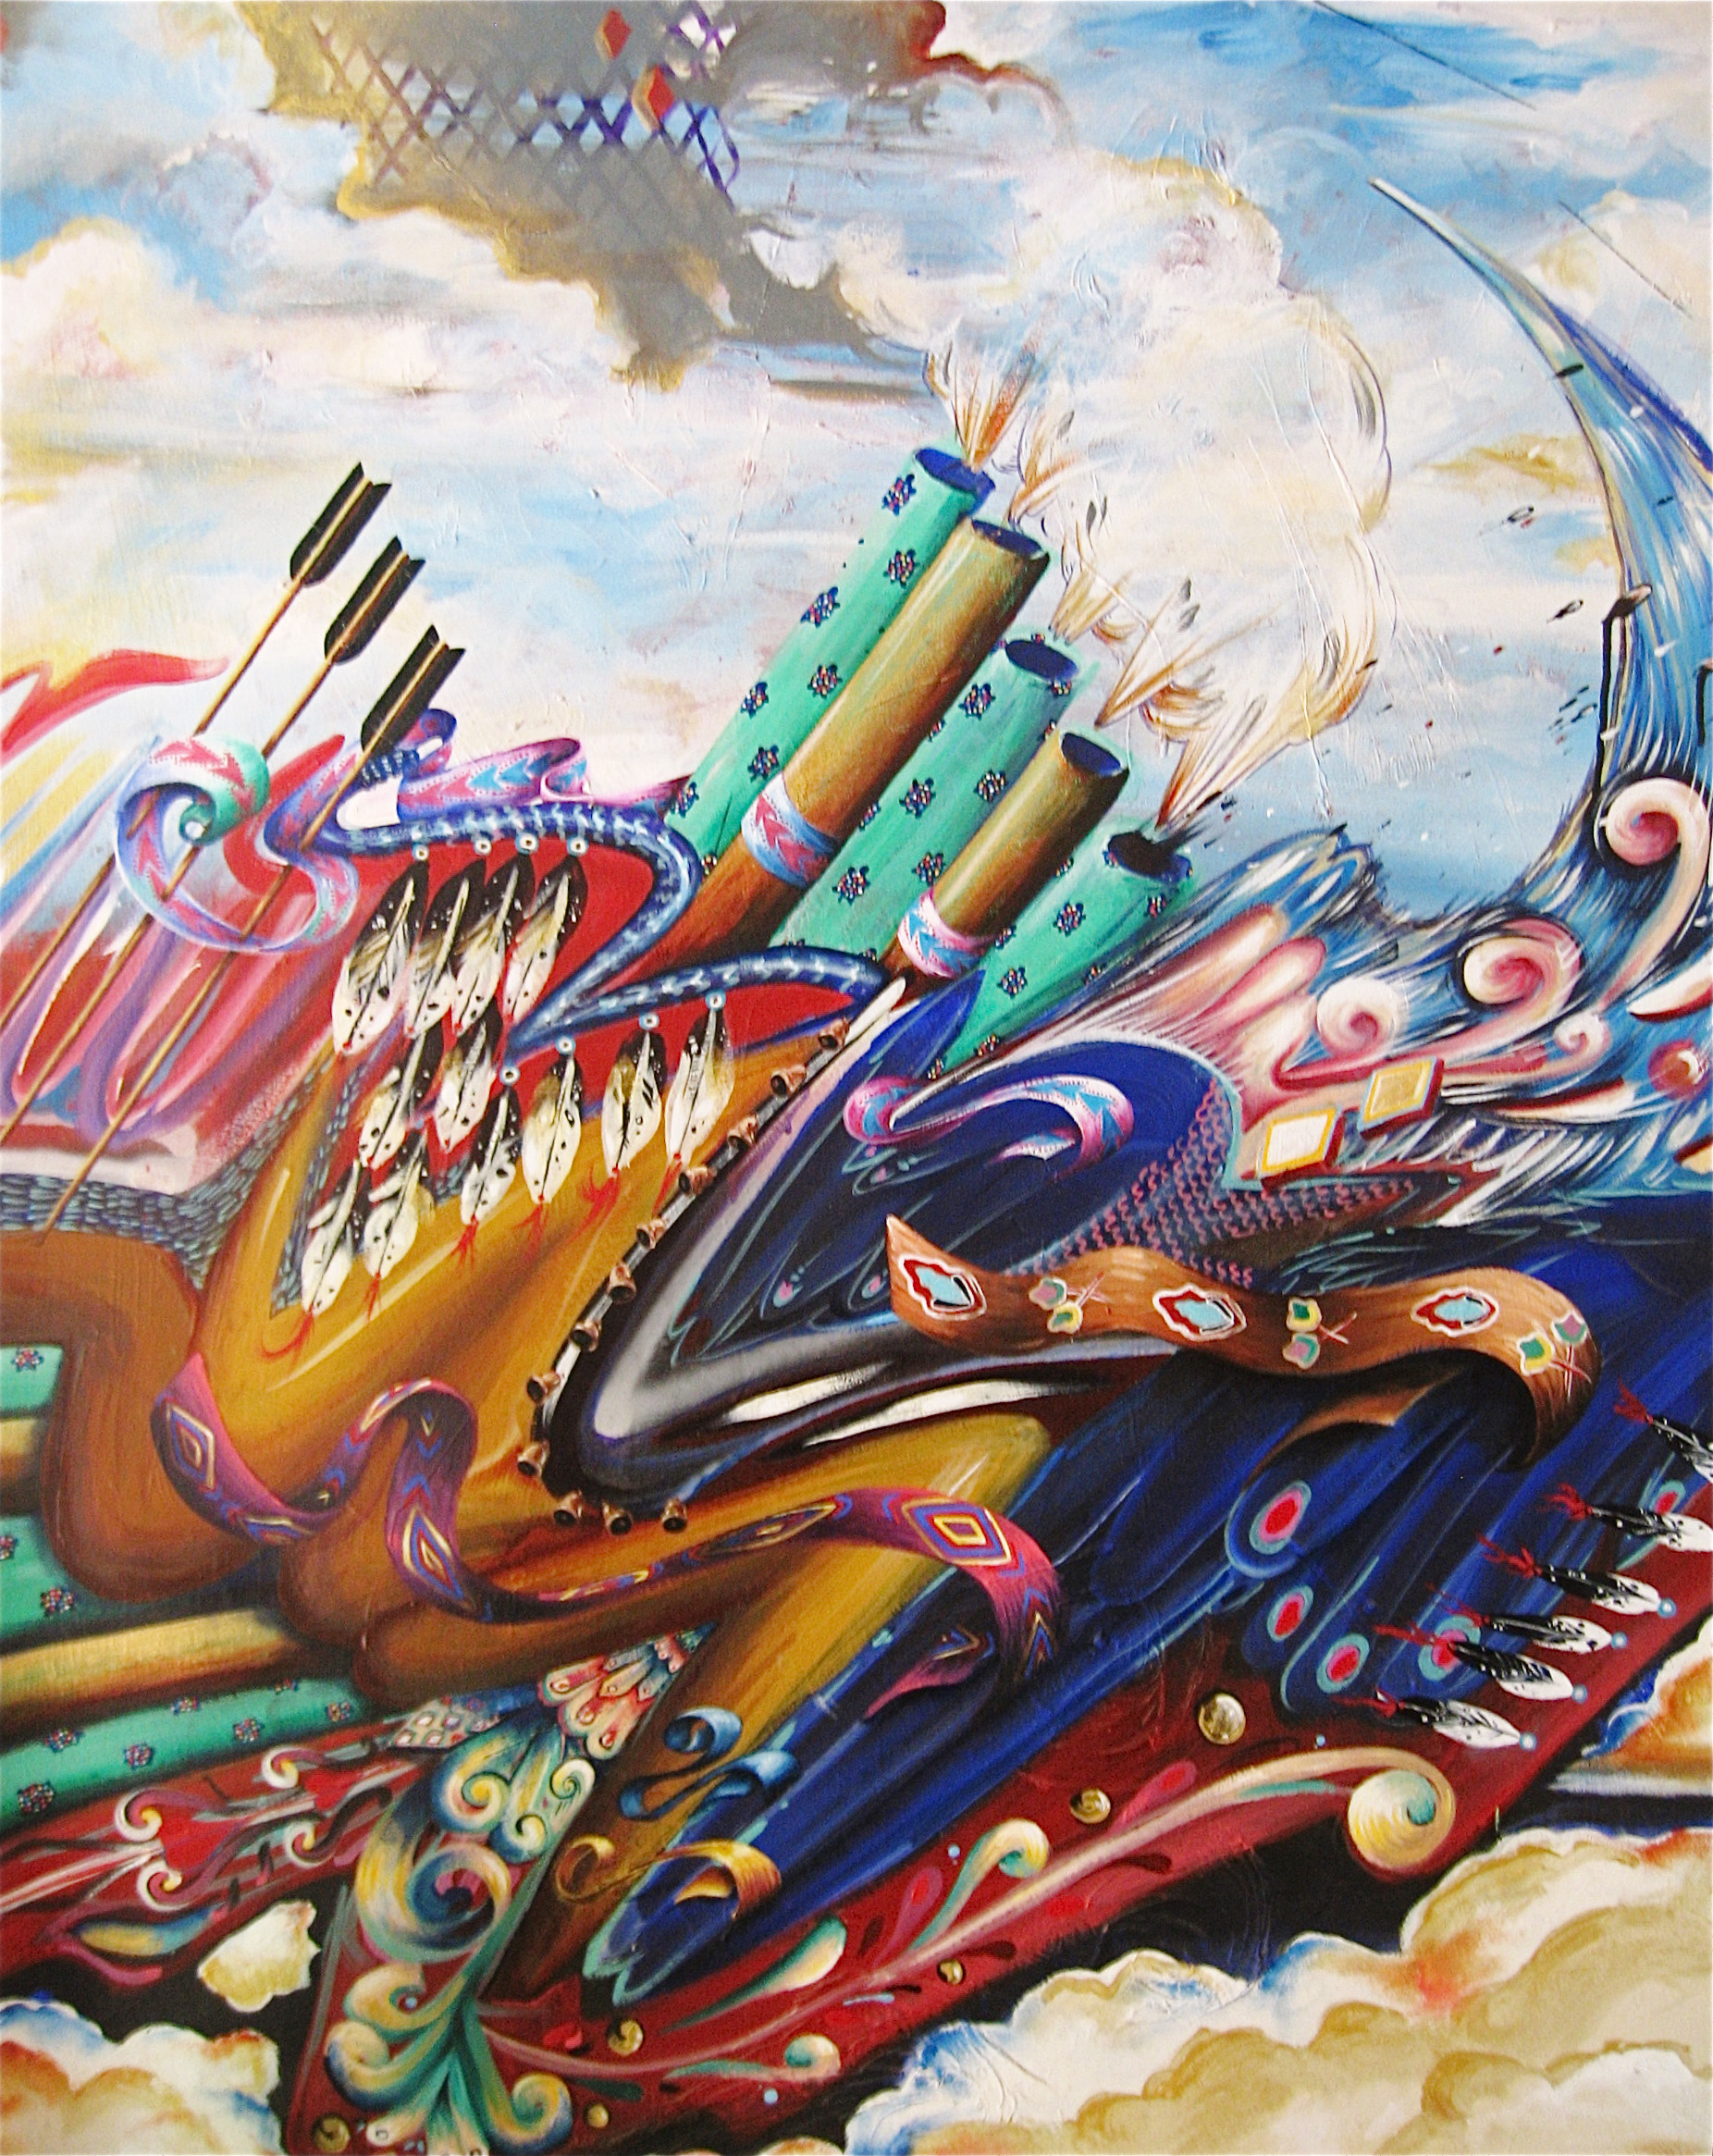 "WarParty" 42"x 32" Oil on Canvas 2007